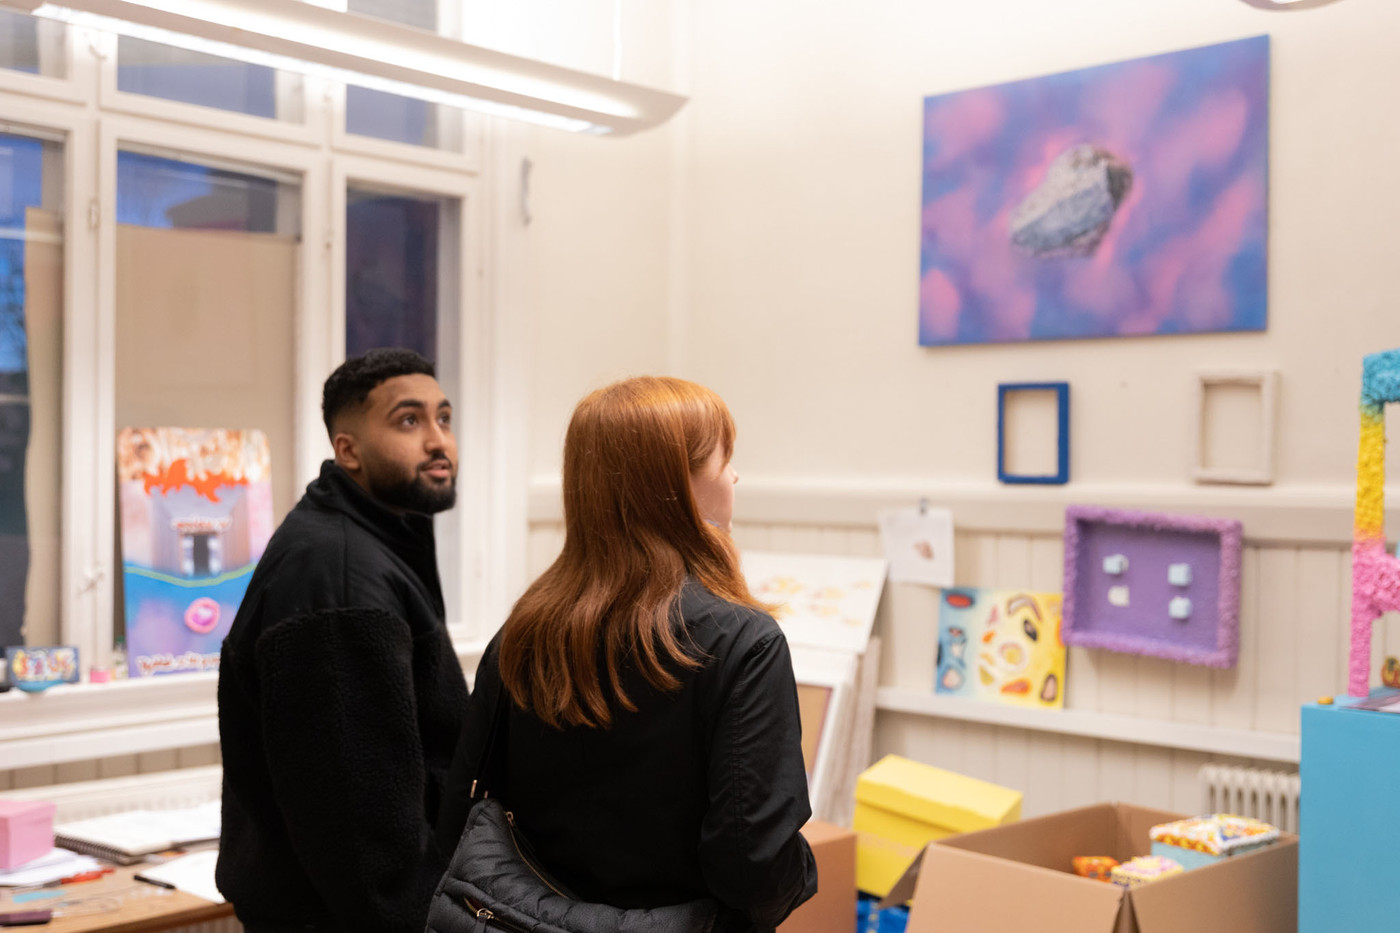 Two people look around a room filled with artworks in bright yellow, pink and purple.